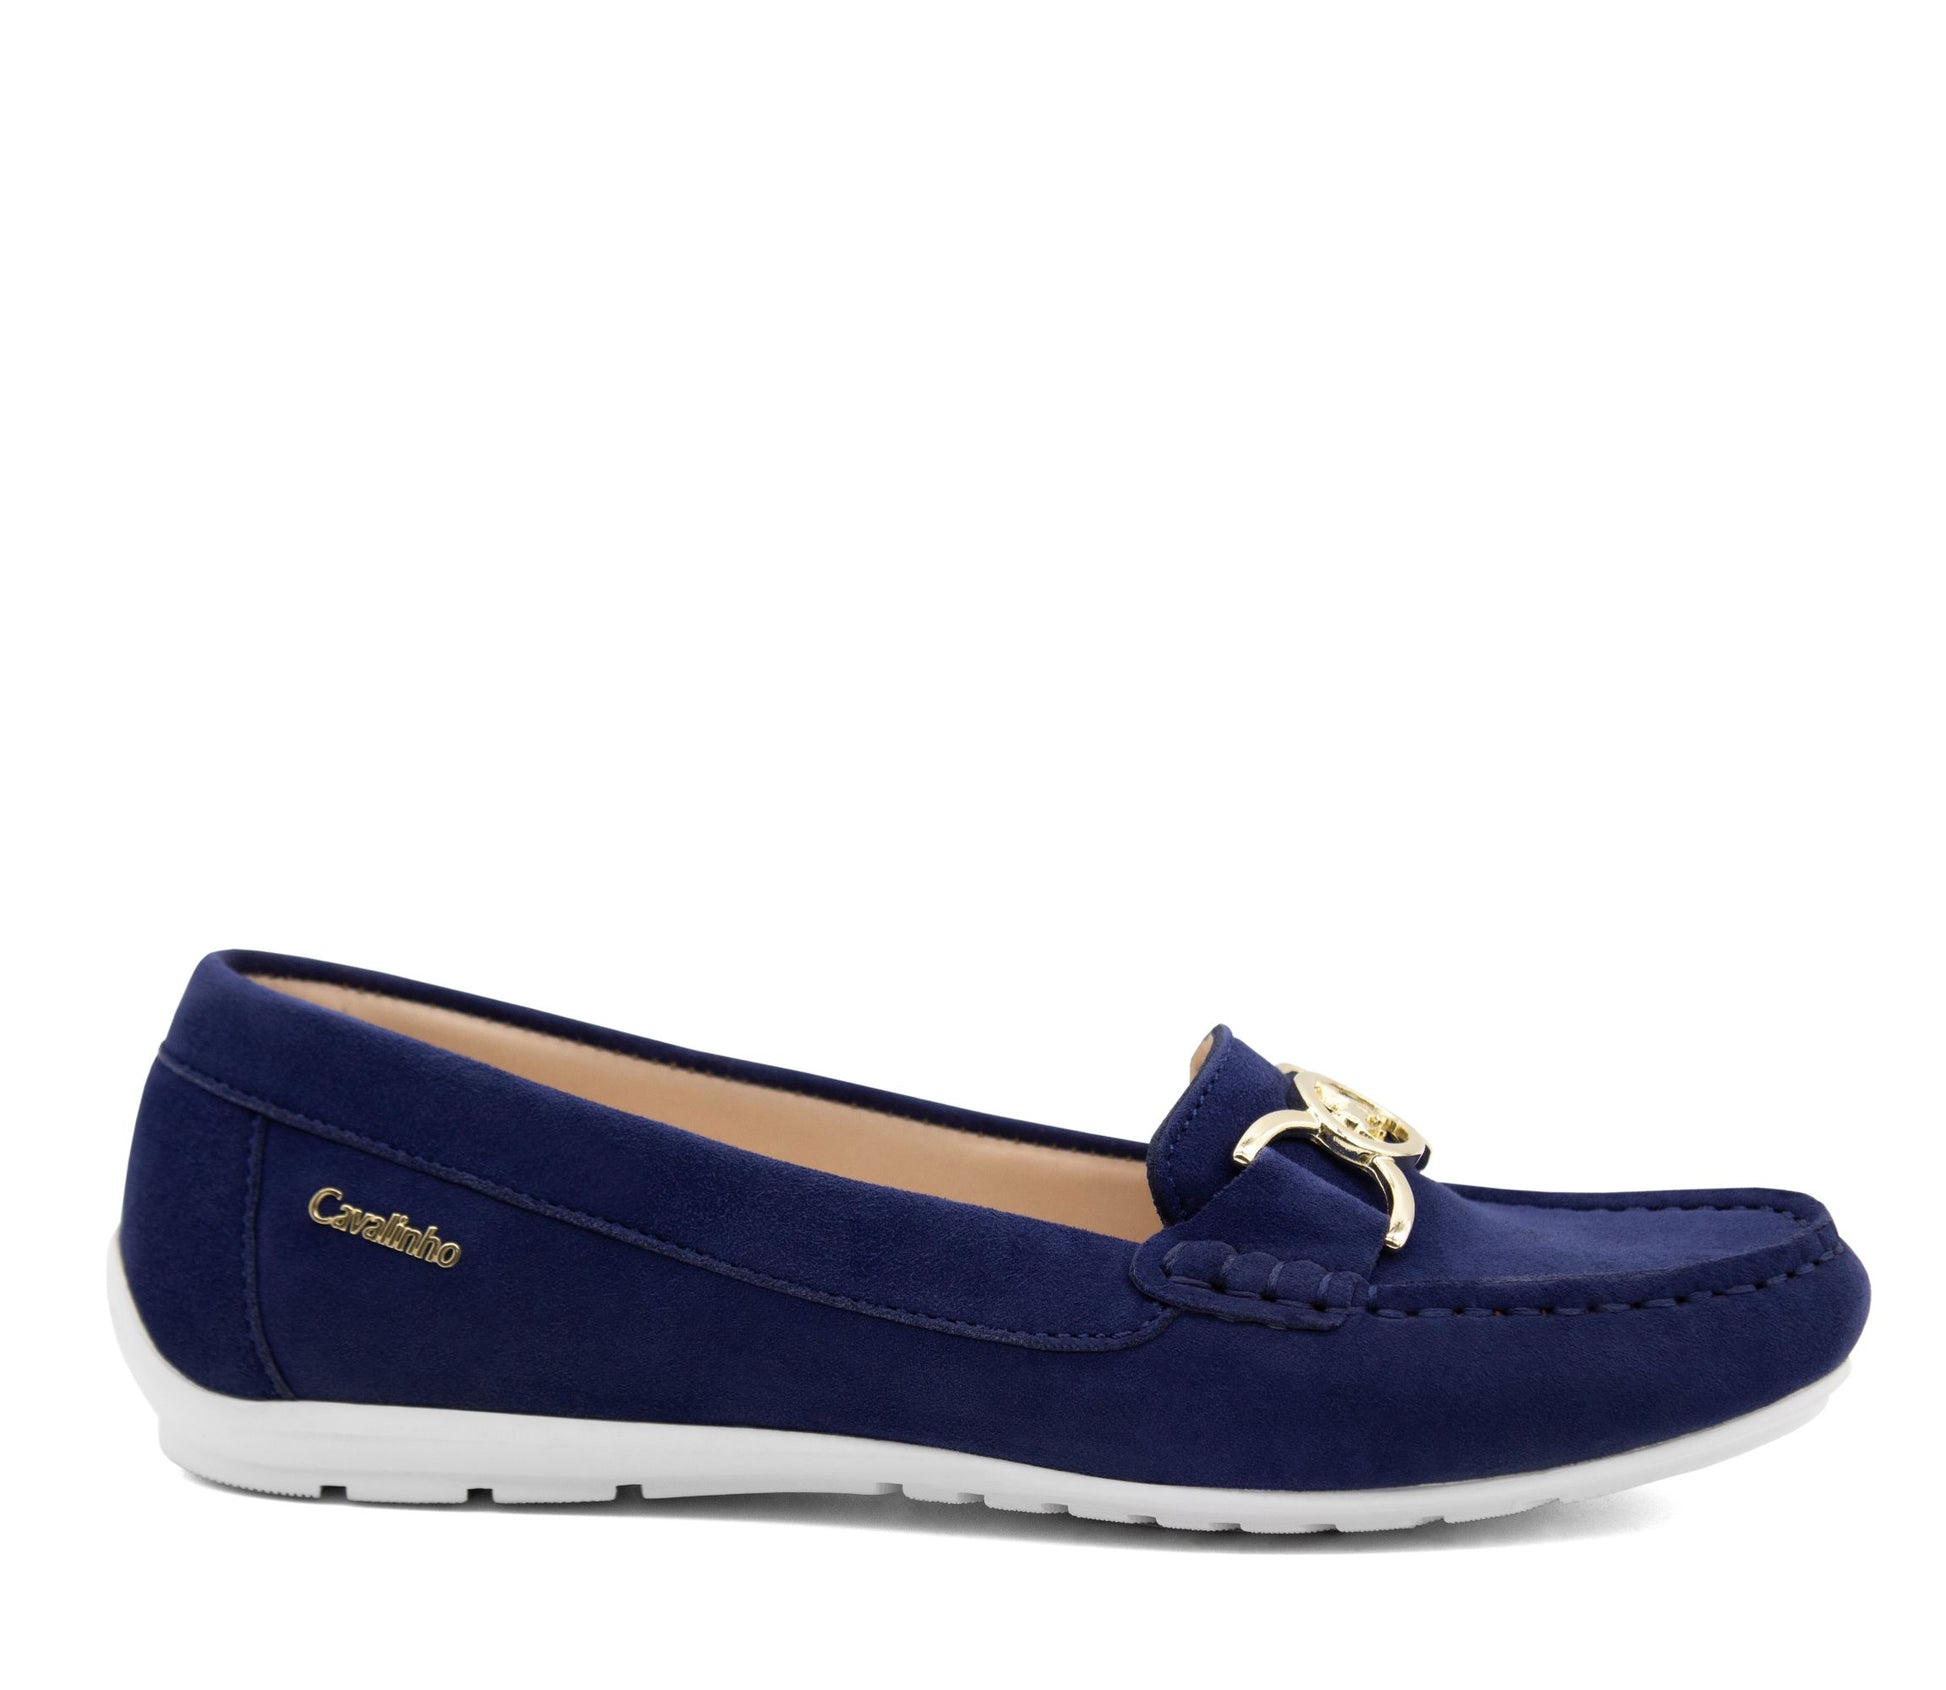 Cavalinho Belle Leather Loafers - Navy - 48020001.03_1